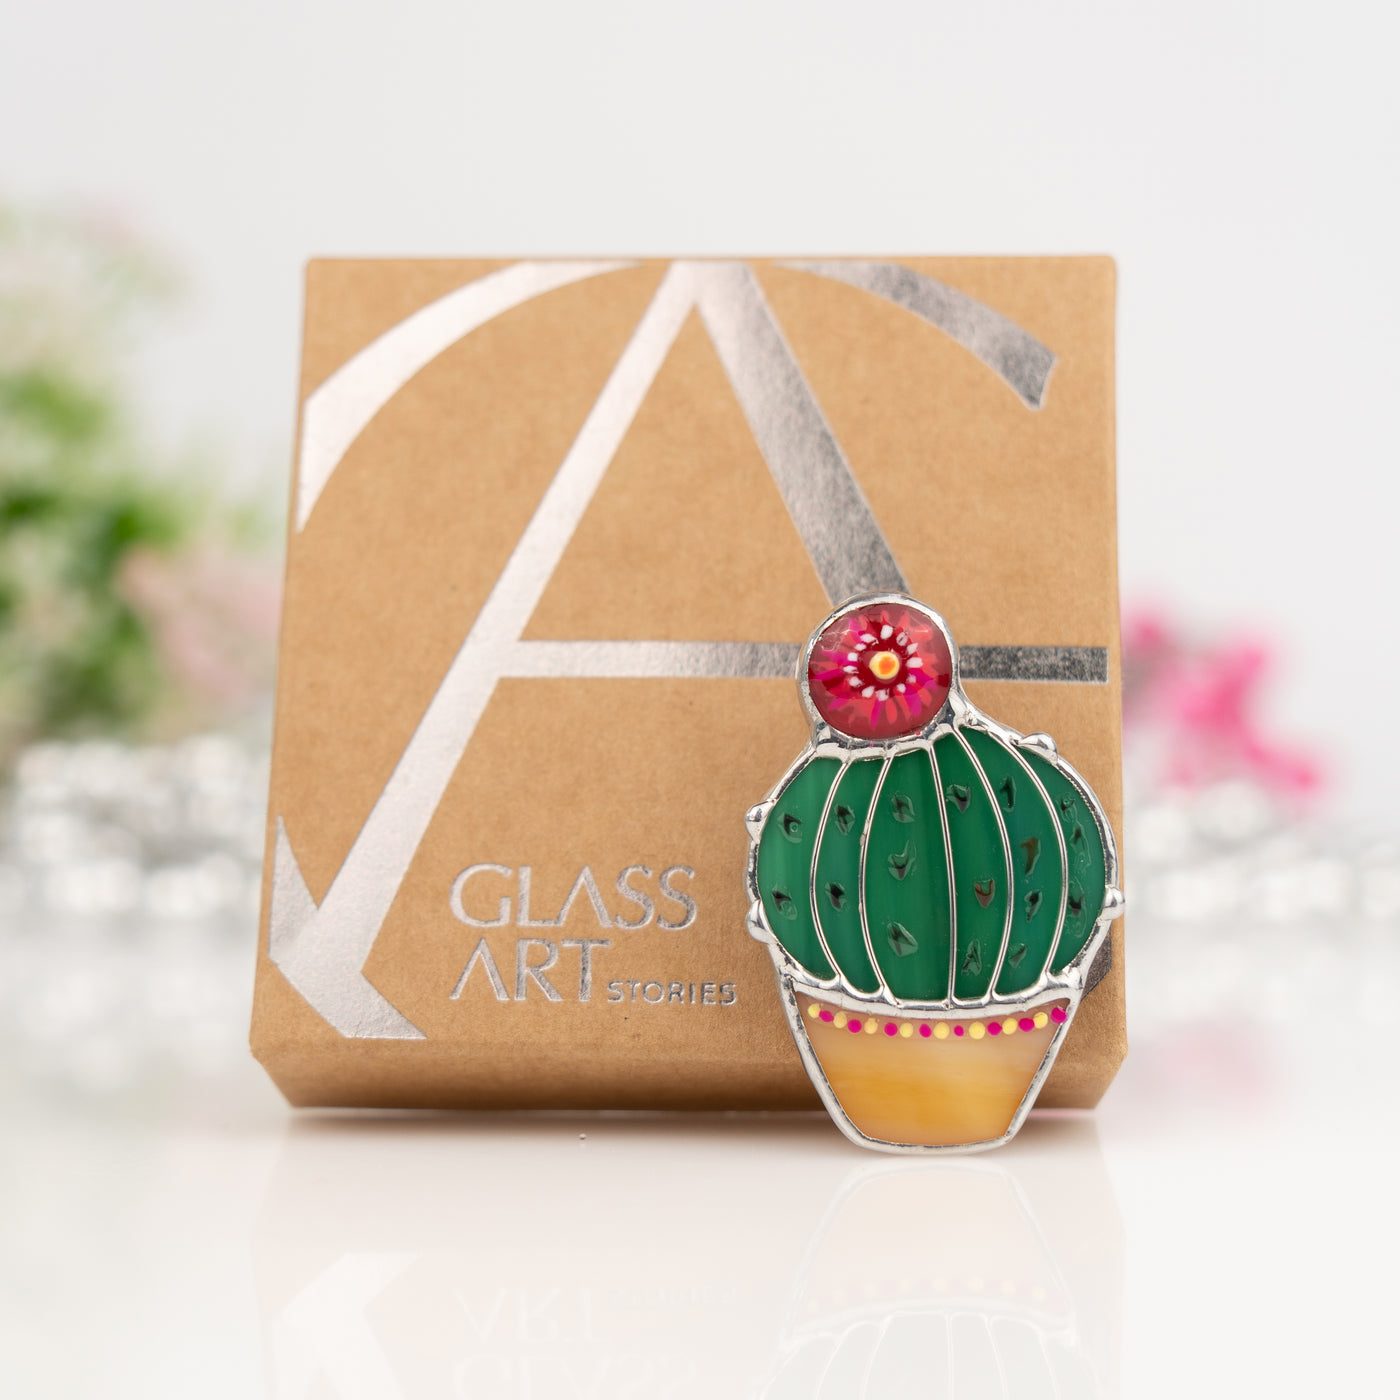 Stained glass cactus pin and a brand box